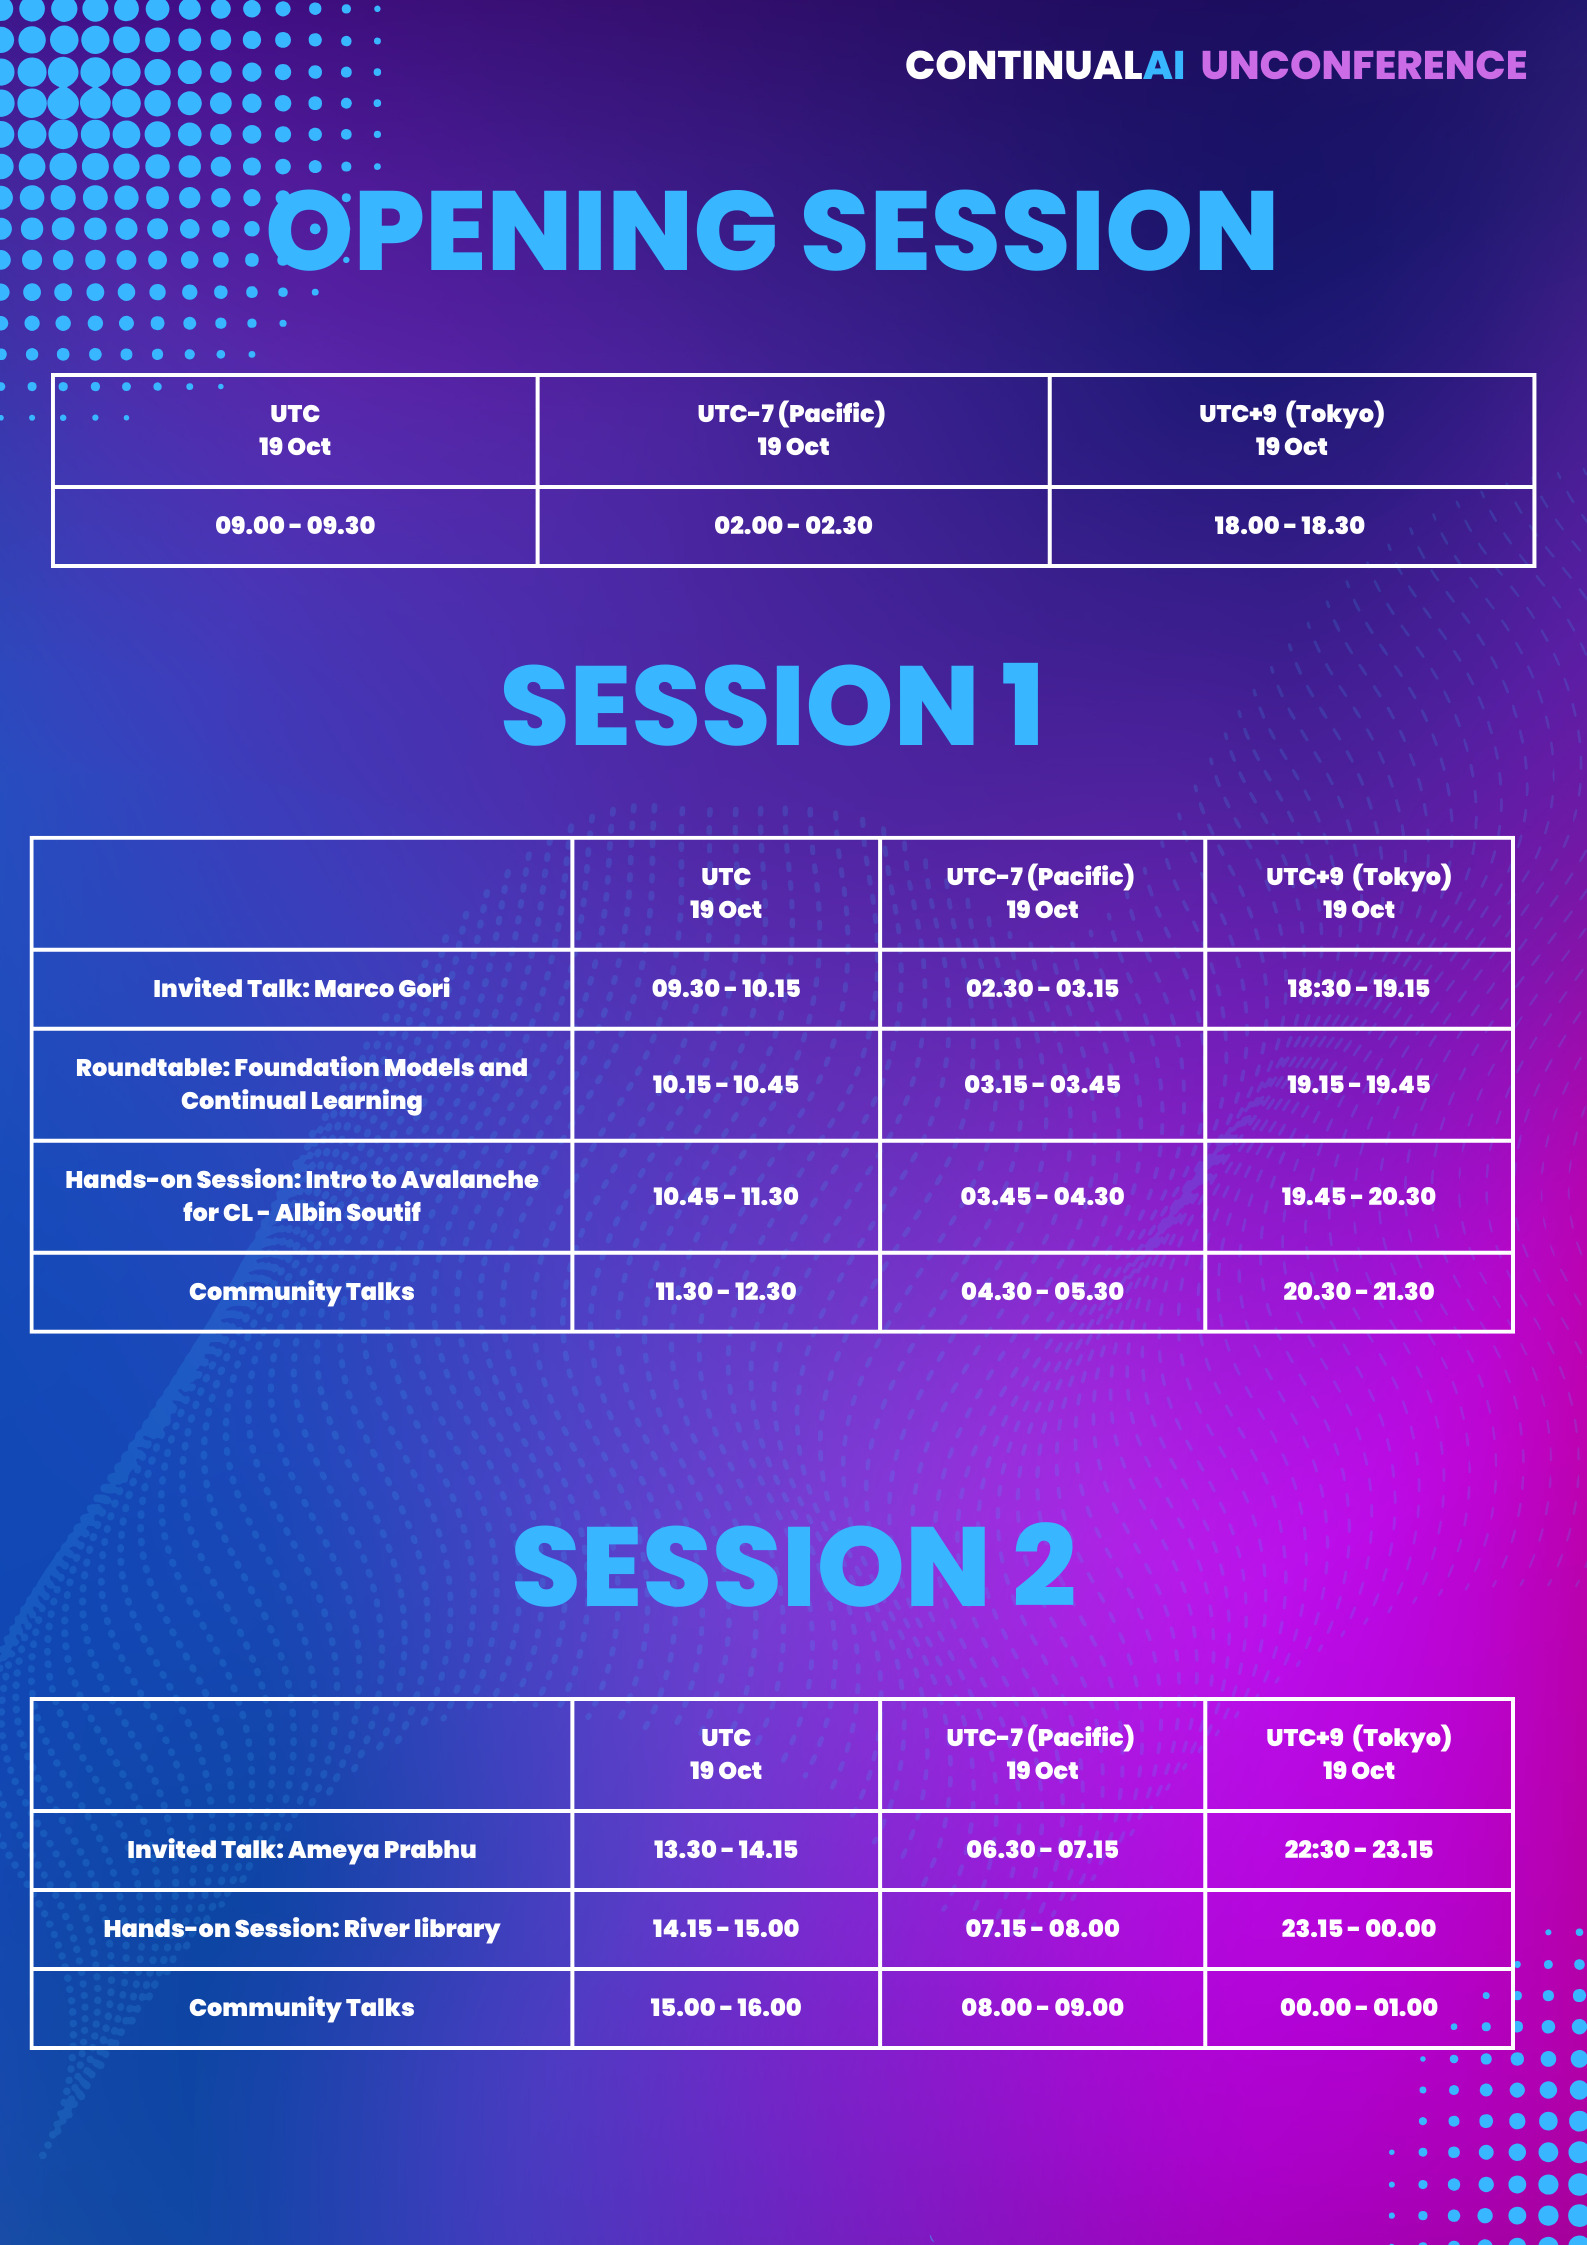 Schedule of Opening Session, Session 1, Session 2